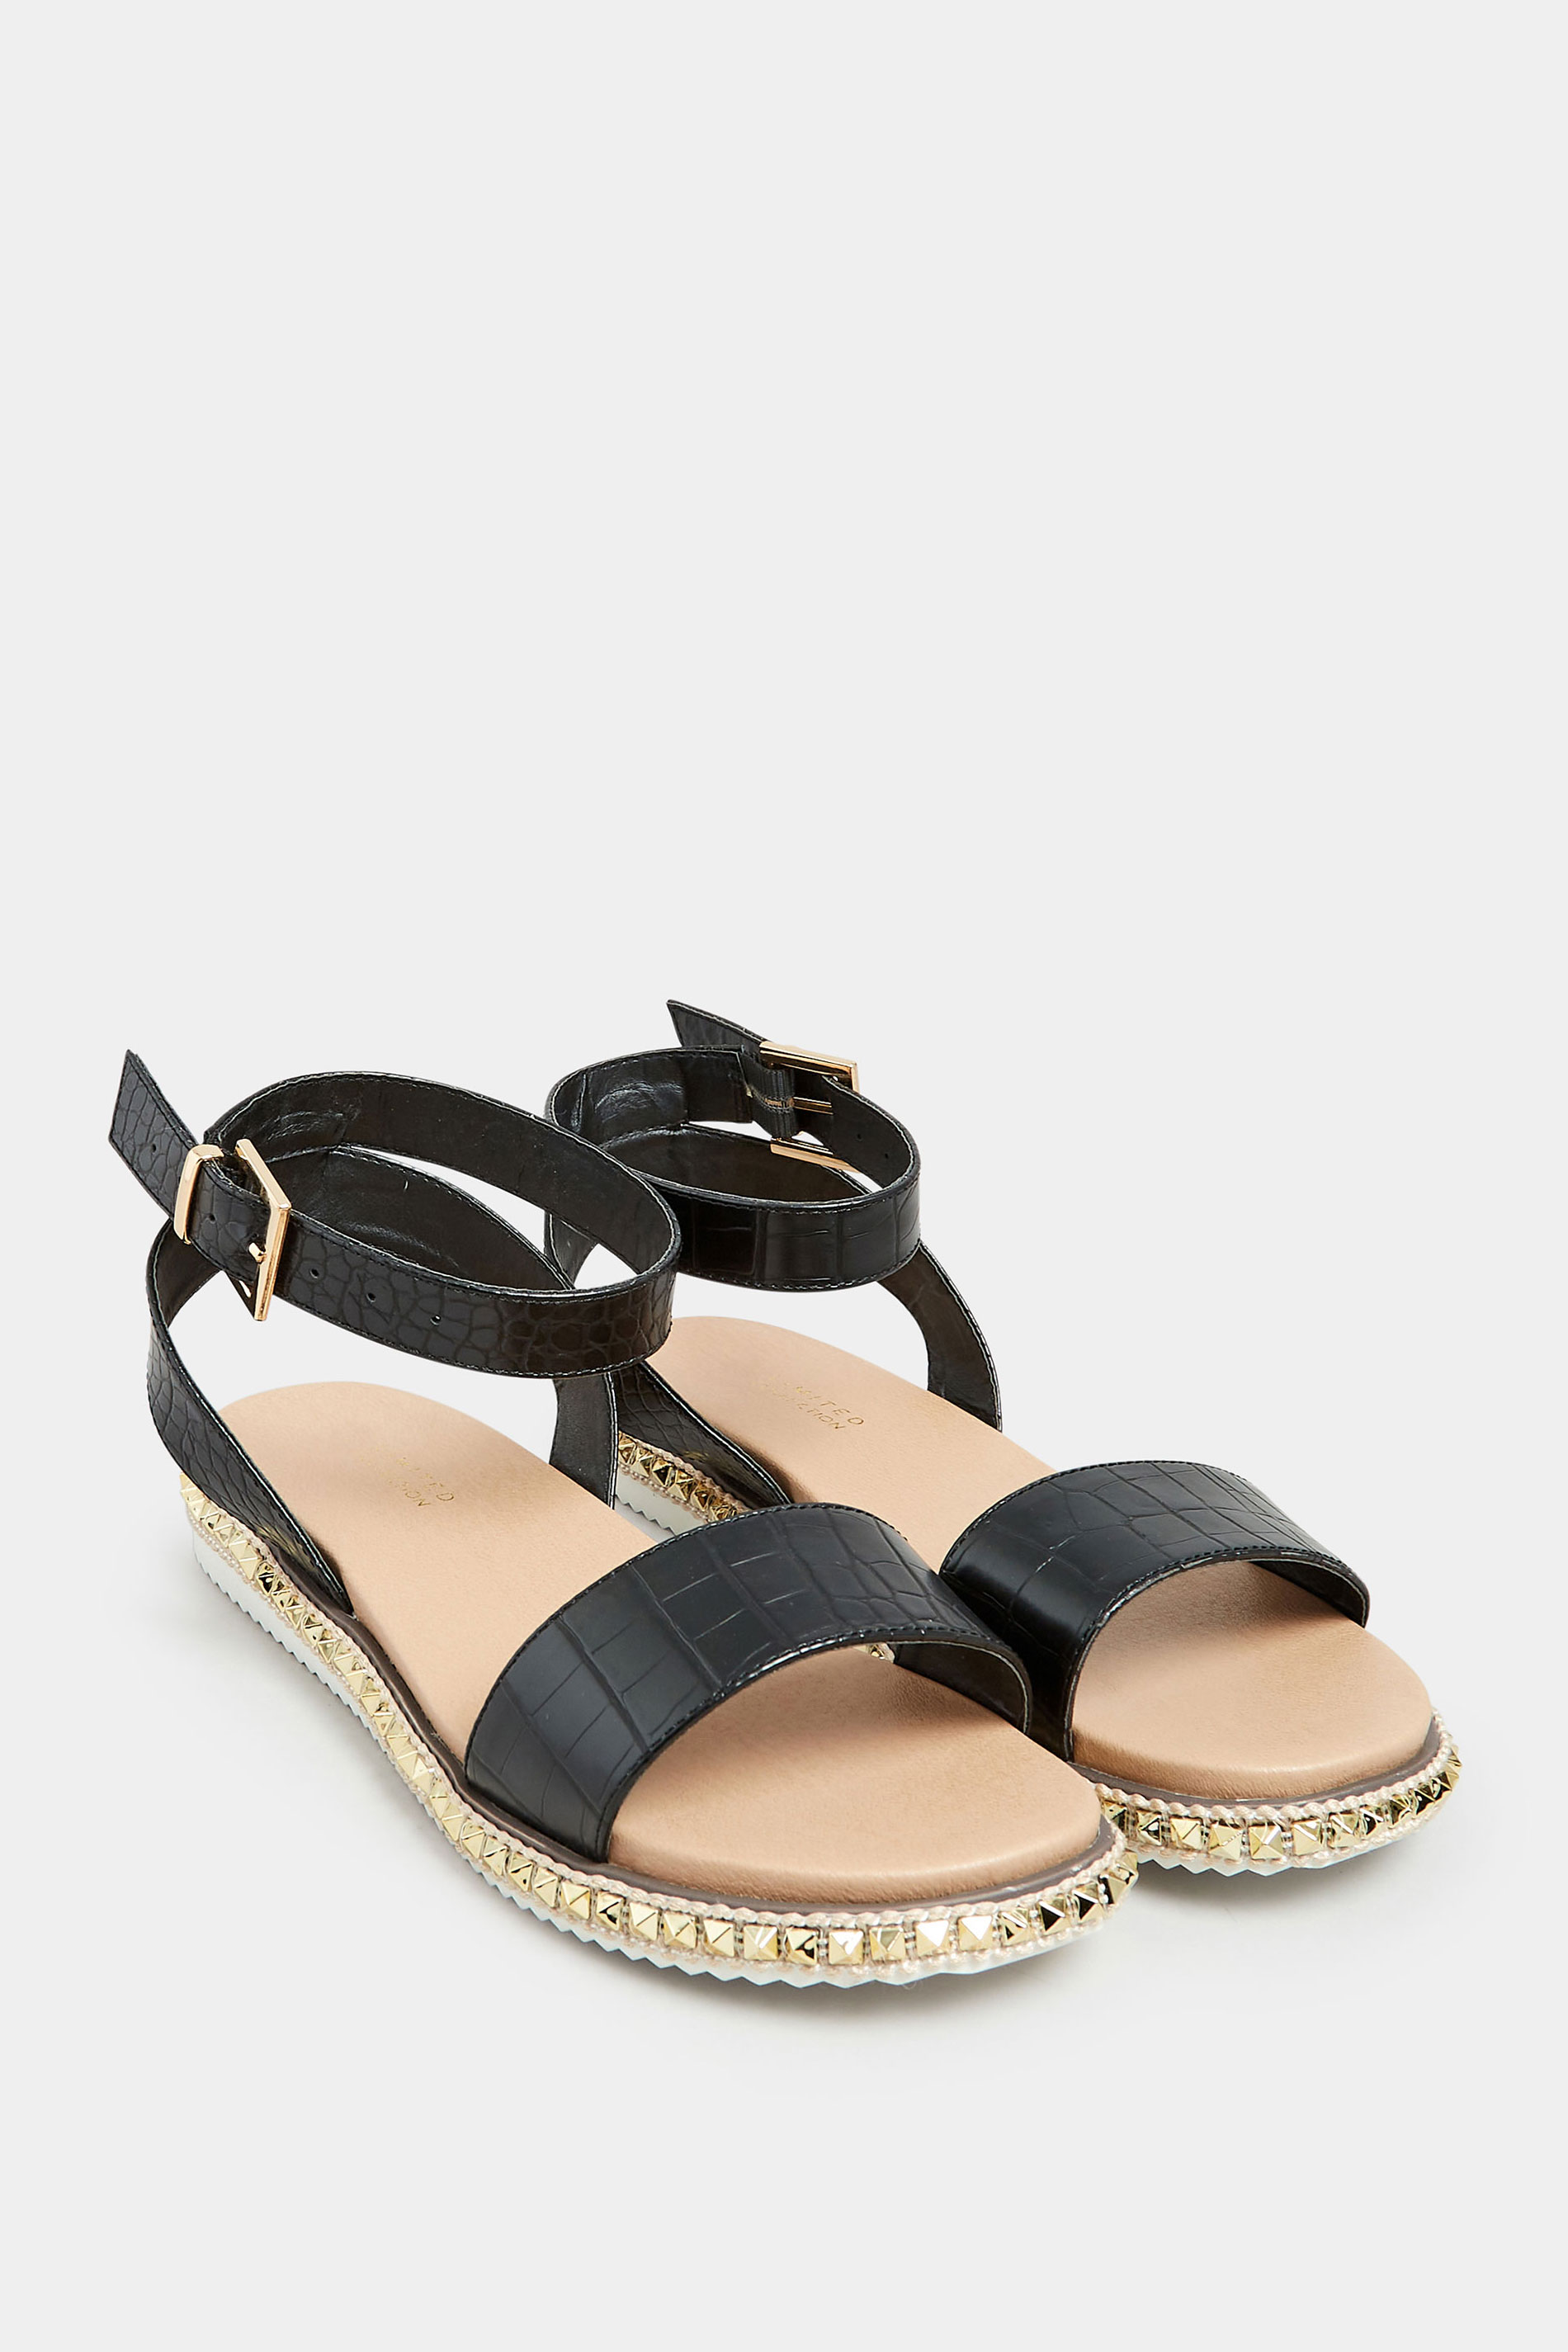 Black Croc Faux Leather Studded Sandals In Extra Wide EEE Fit | Yours Clothing 2